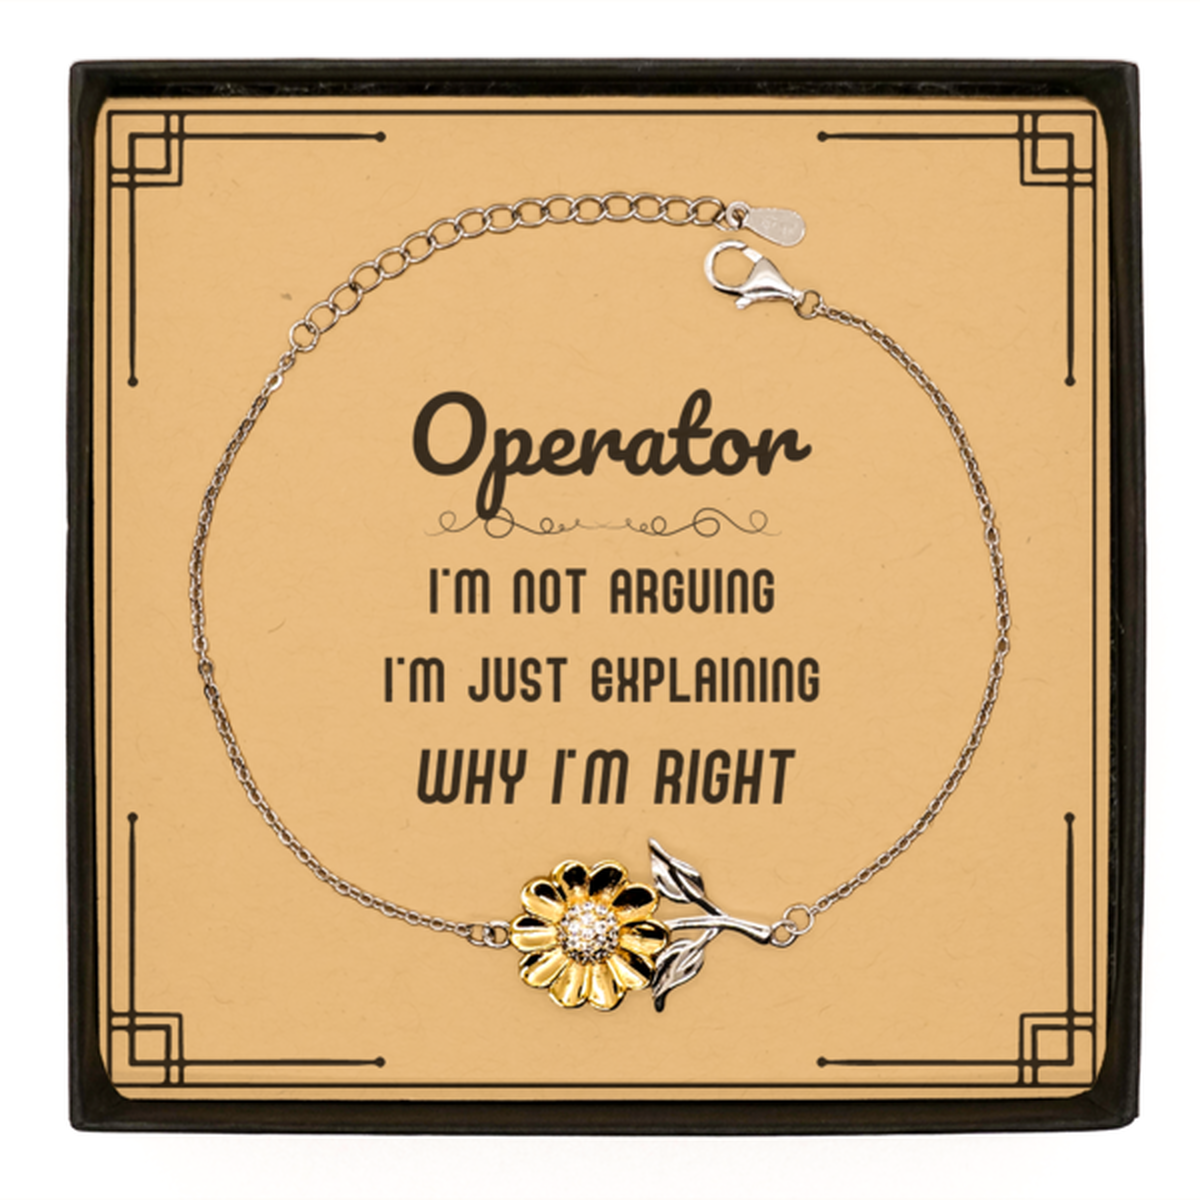 Operator I'm not Arguing. I'm Just Explaining Why I'm RIGHT Sunflower Bracelet, Funny Saying Quote Operator Gifts For Operator Message Card Graduation Birthday Christmas Gifts for Men Women Coworker